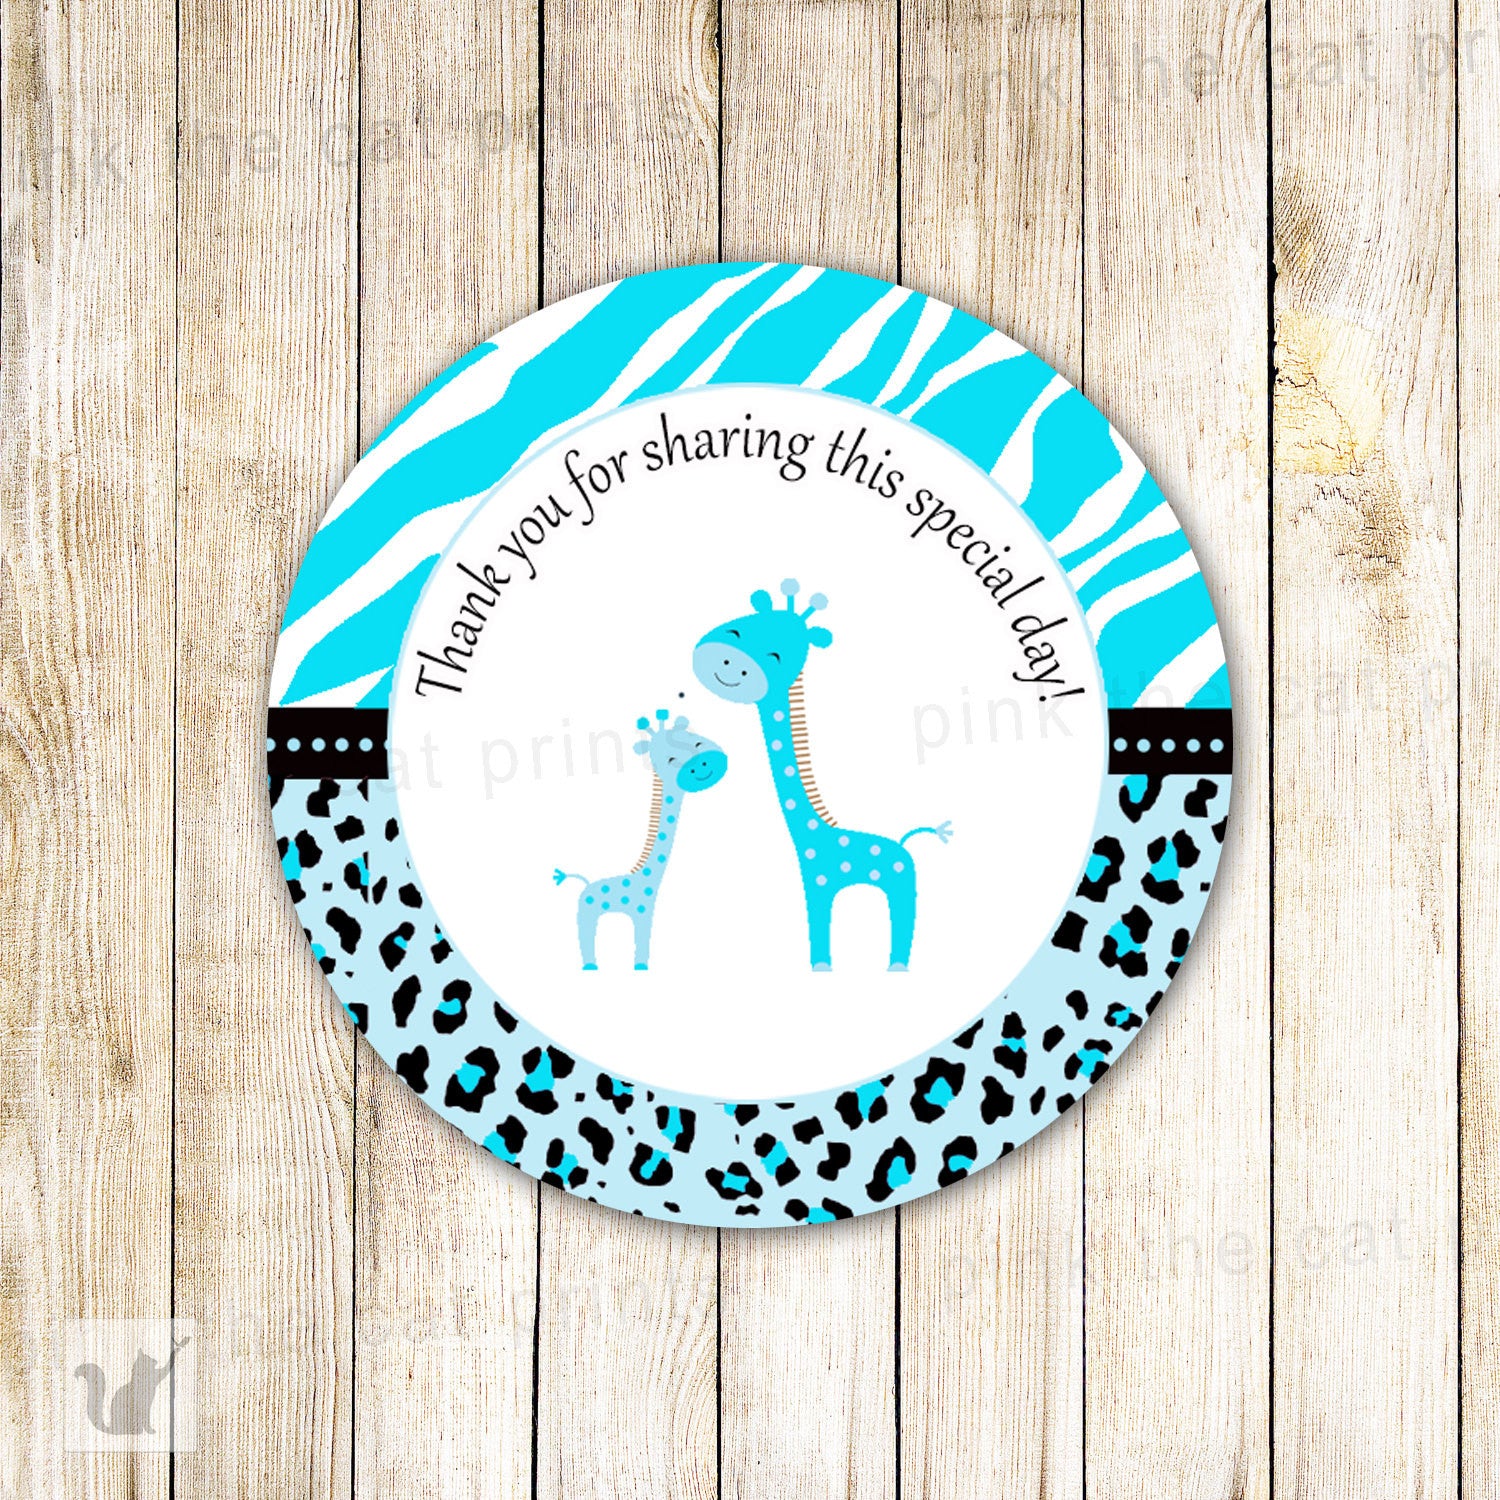 INSTANT DOWNLOAD Turquoise Giraffe Baby Shower Party Thank You Tag - Jungle Leopard Zebra Party Favors Baby Shower Favors Party Decorations